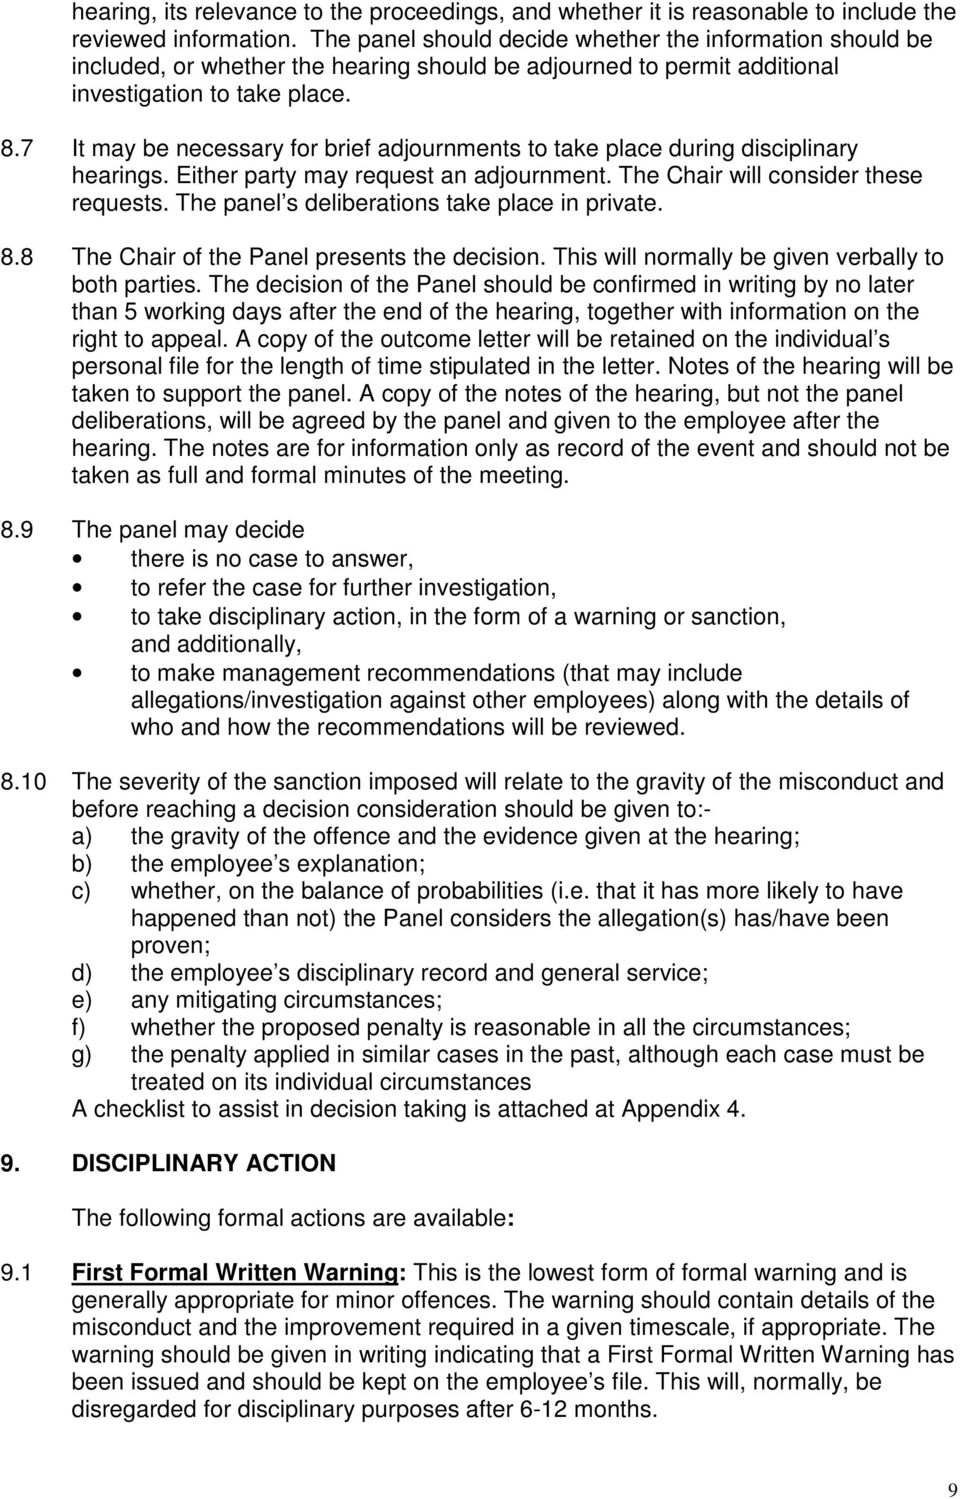 7 It may be necessary for brief adjournments to take place during disciplinary hearings. Either party may request an adjournment. The Chair will consider these requests.